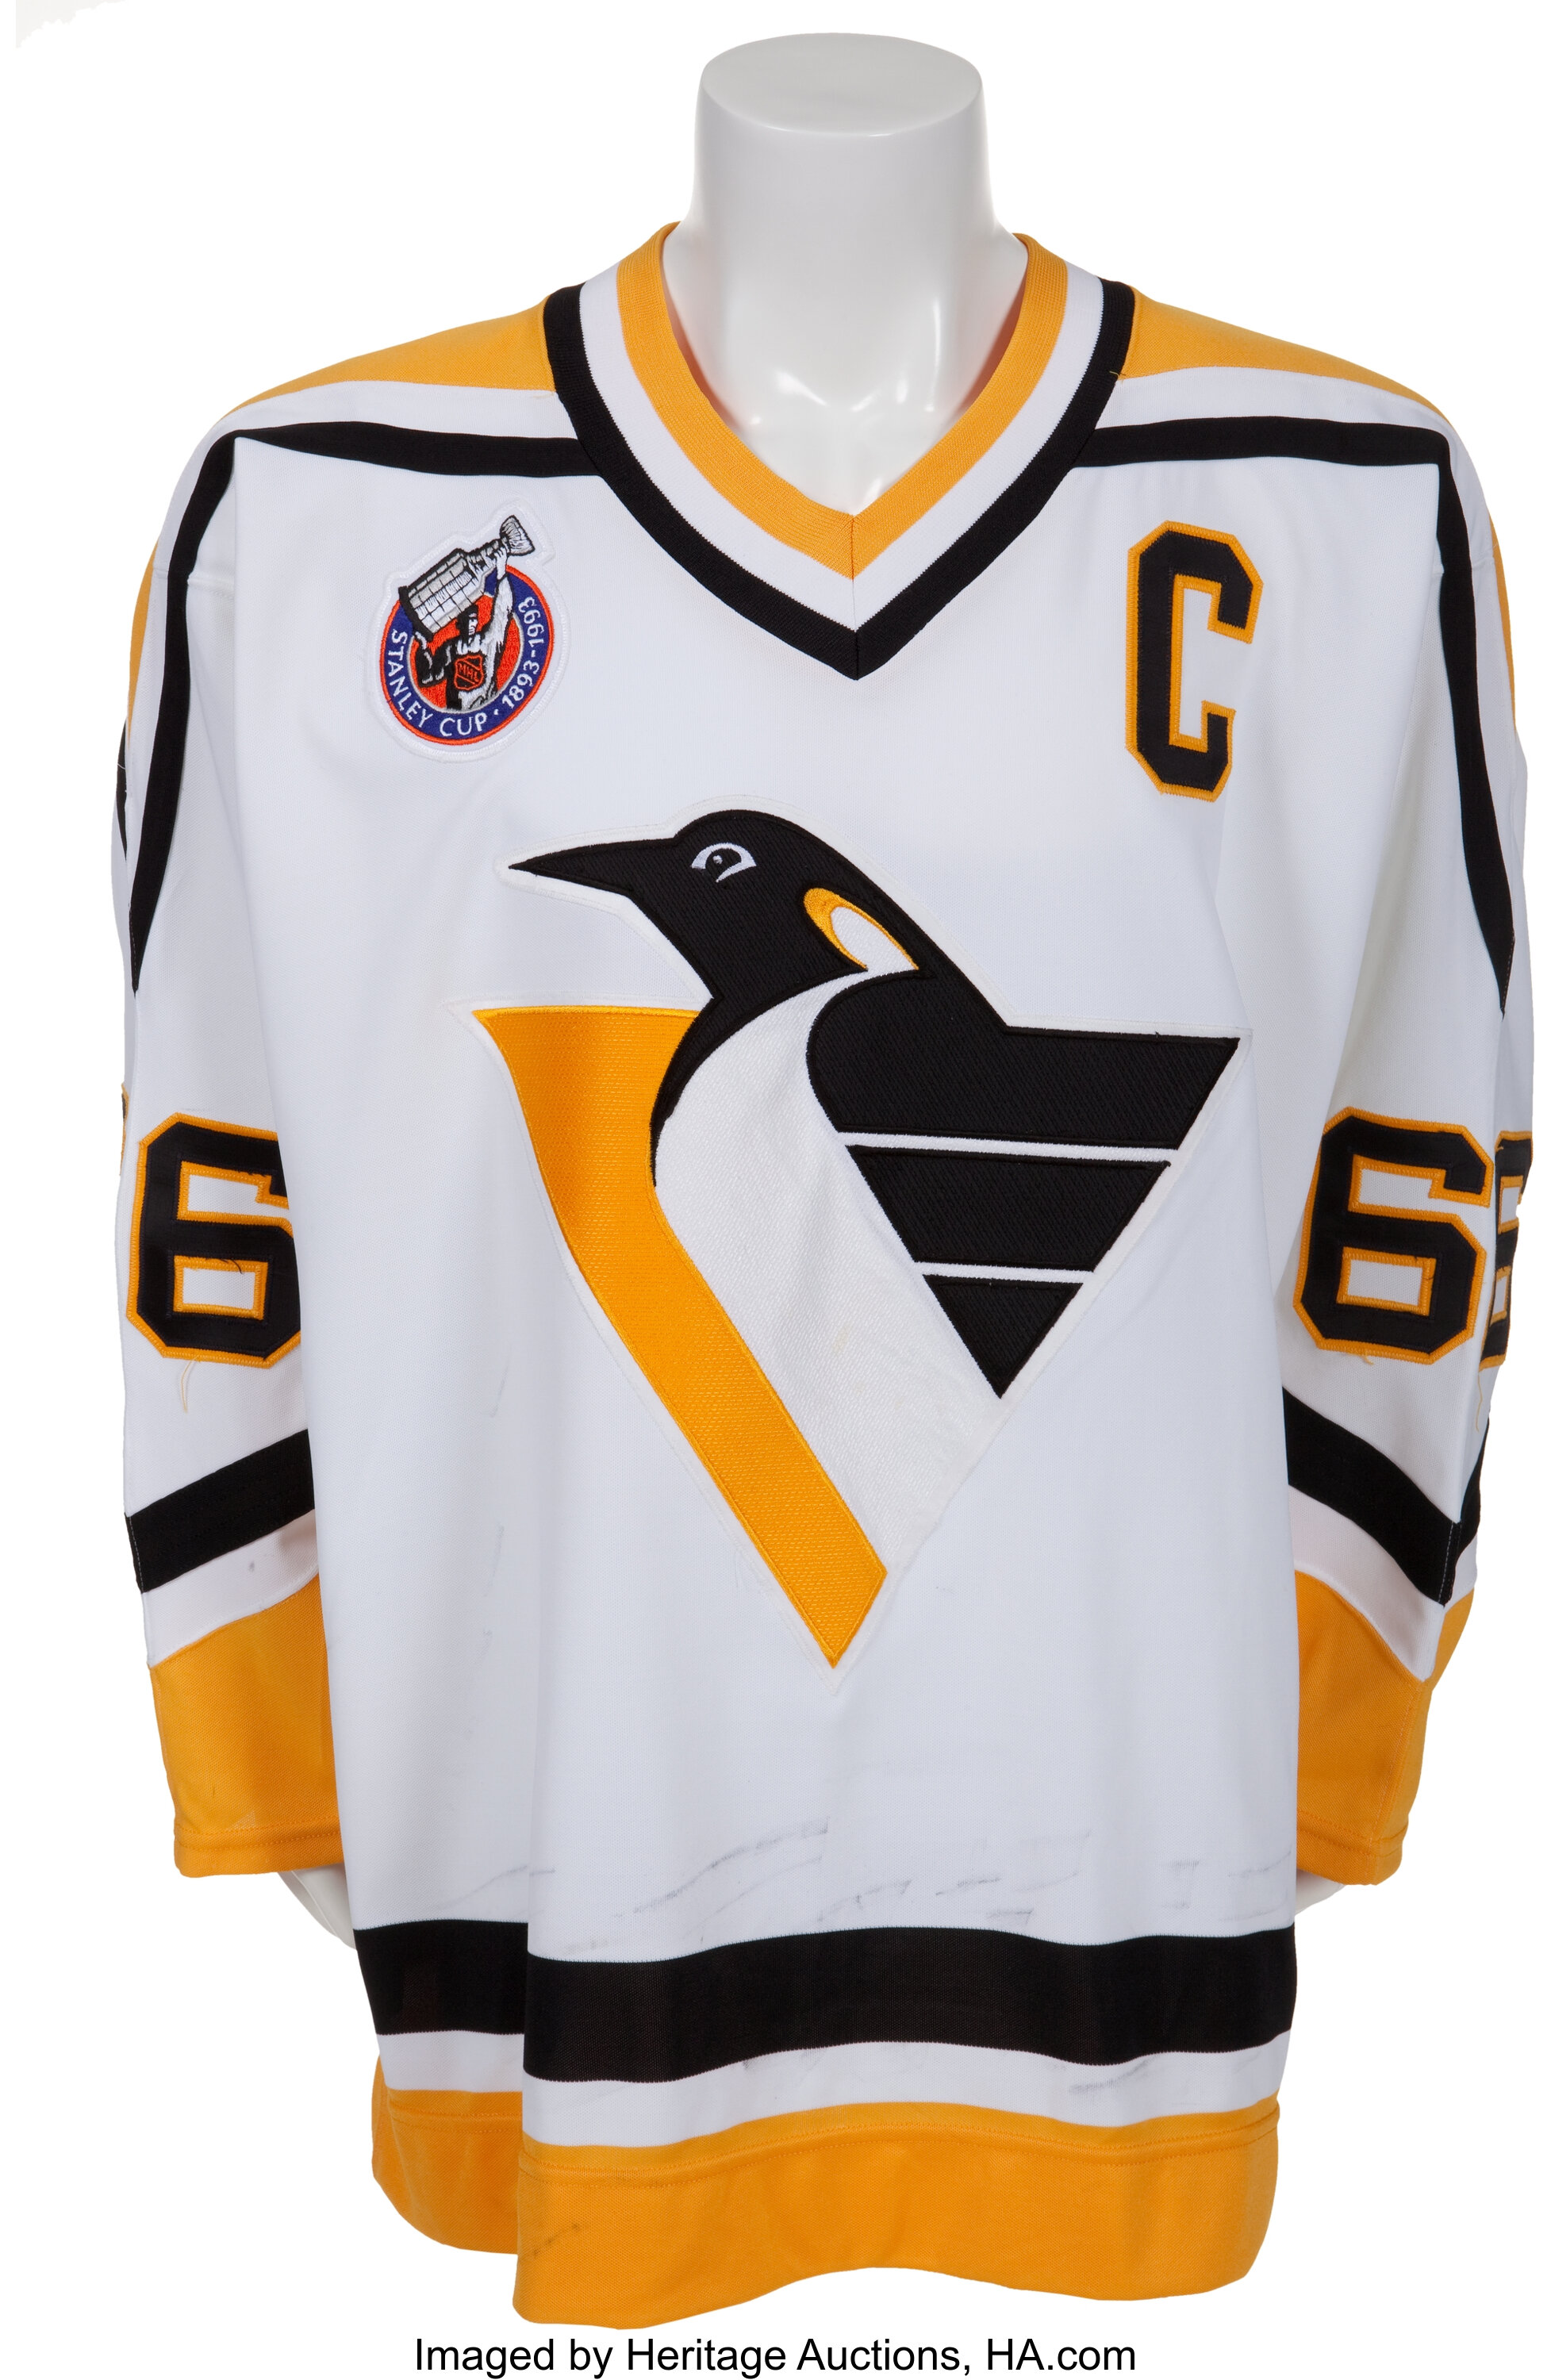 Sold at Auction: Signed Mario LeMieux Pittsburgh Stanley Cup Jersey